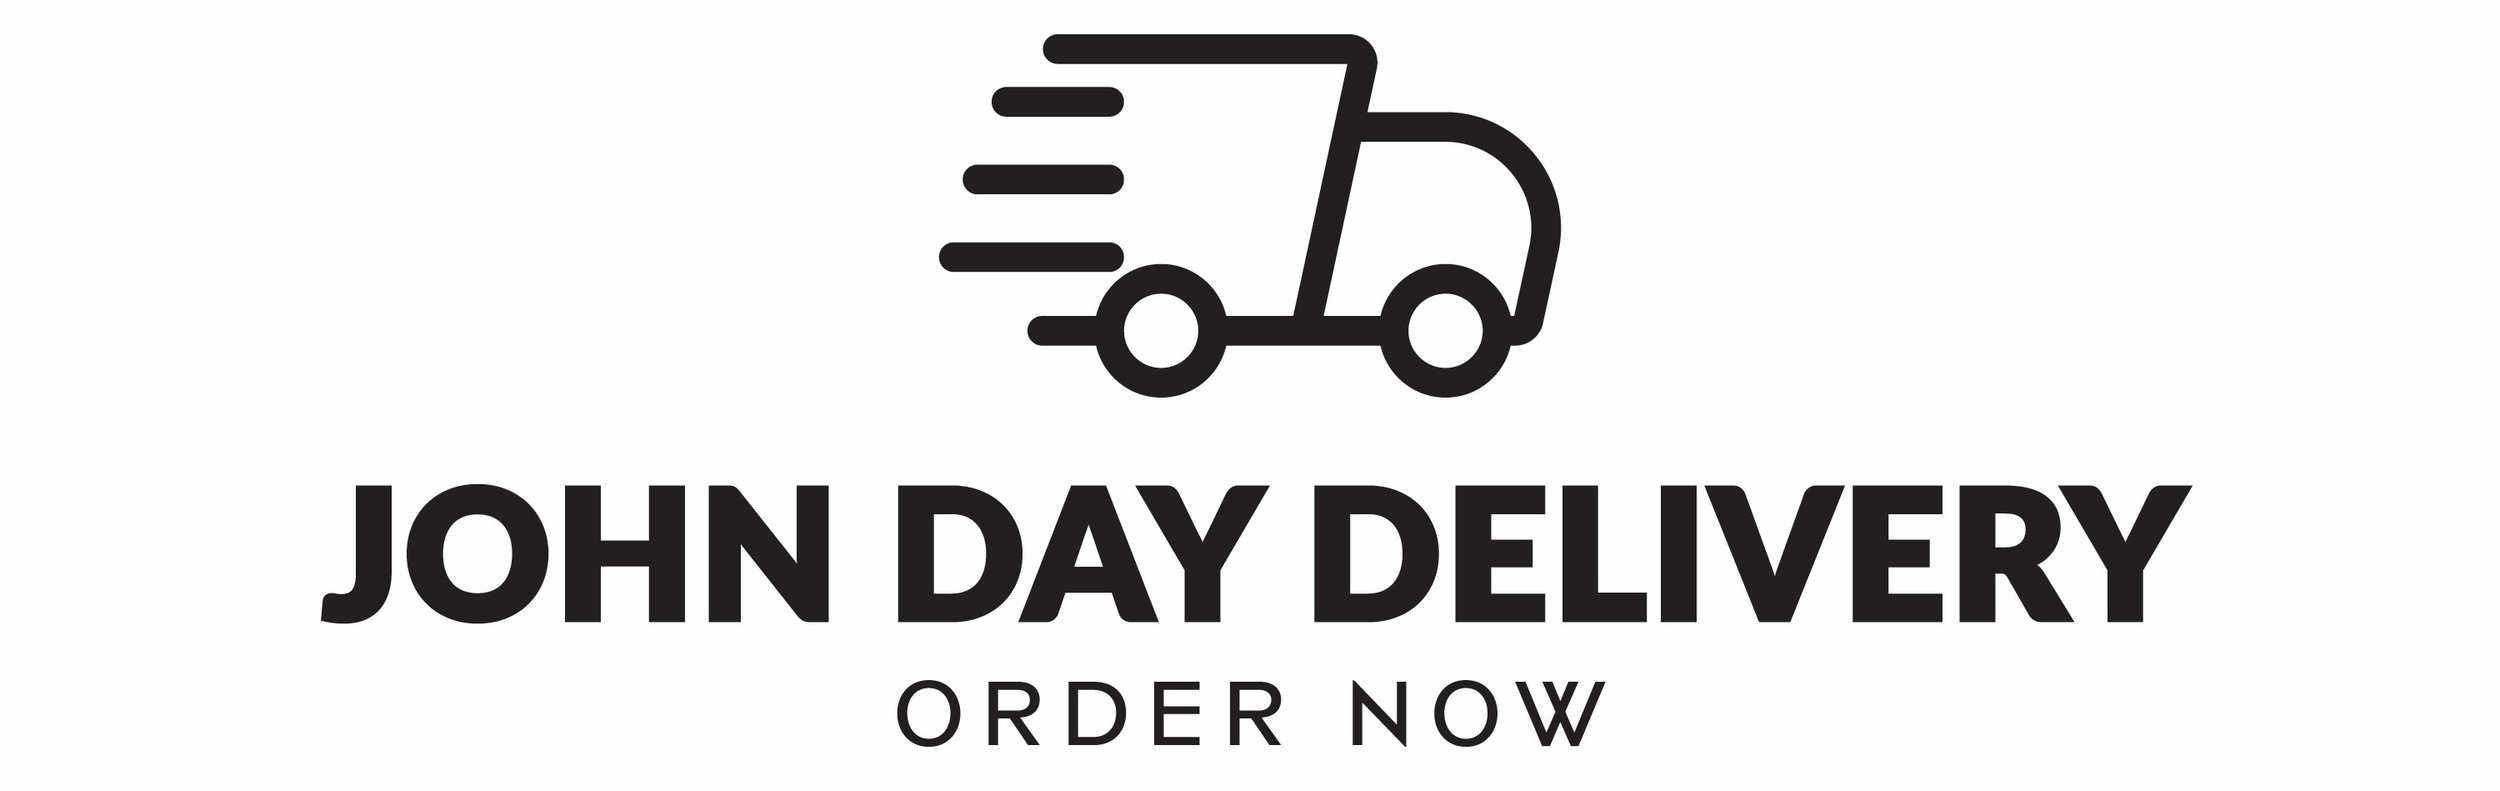 now offering free same-day delivery - CBS News